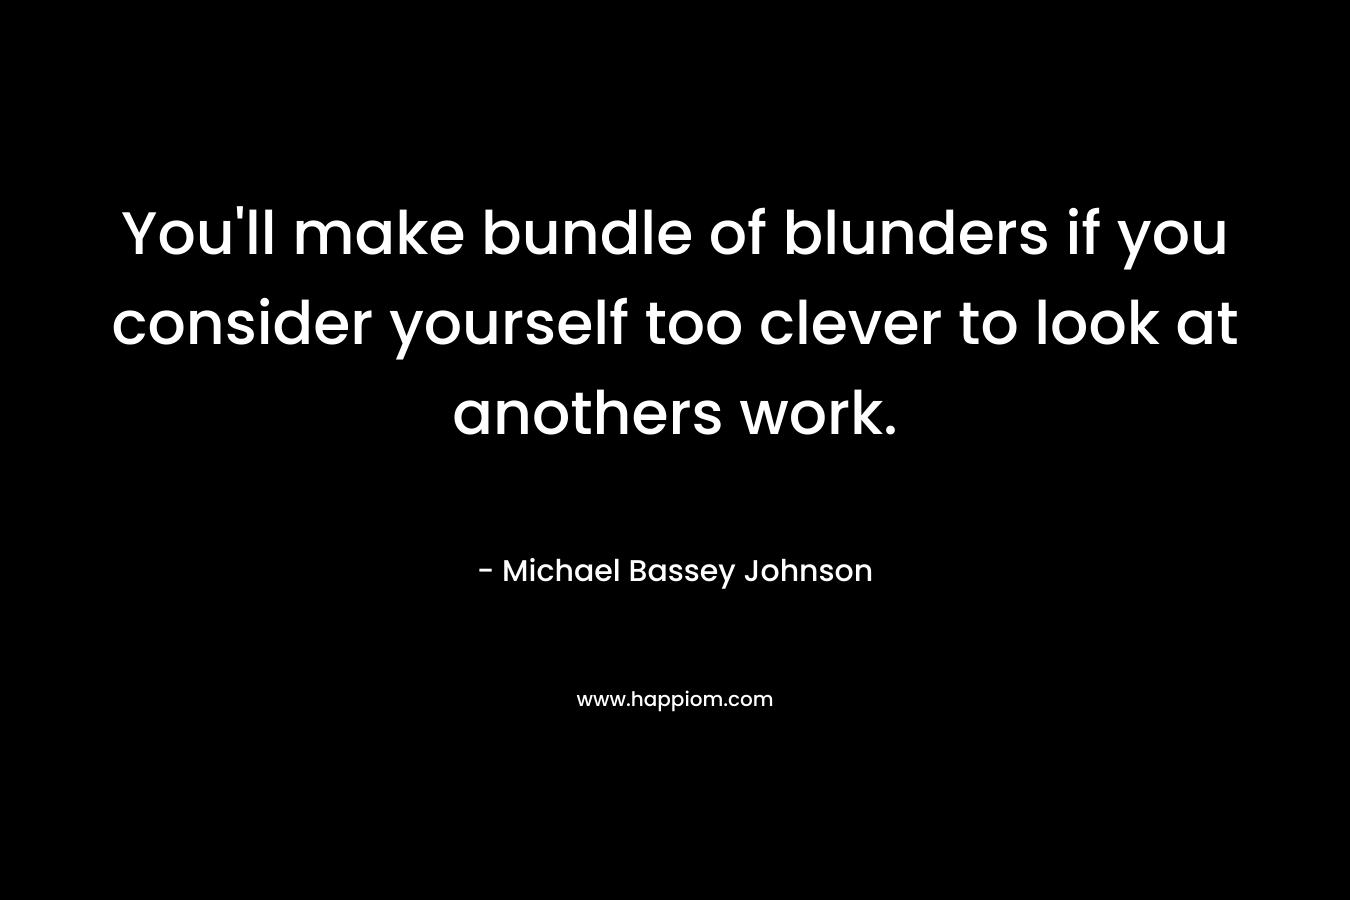 You'll make bundle of blunders if you consider yourself too clever to look at anothers work.